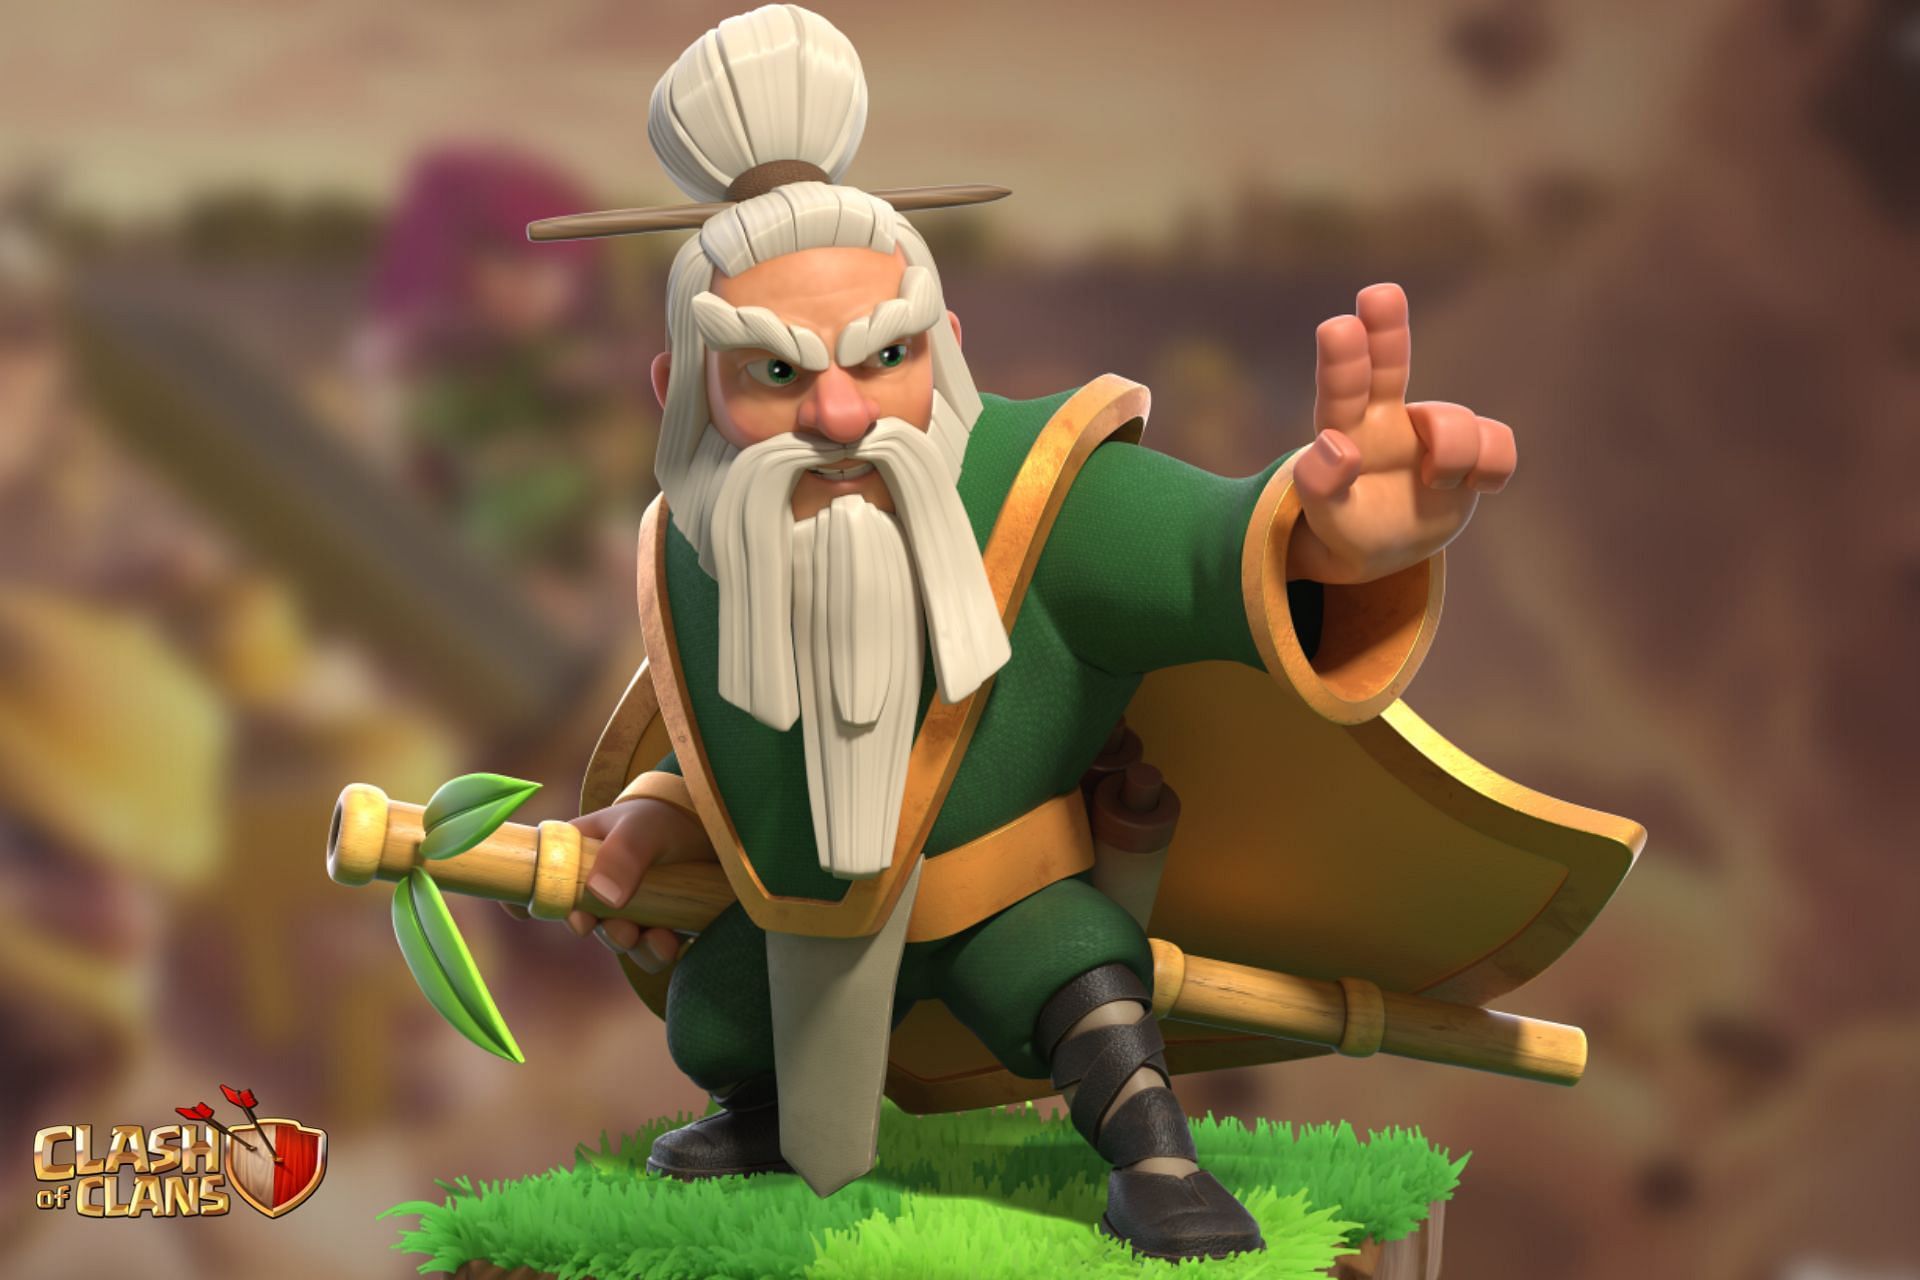 panic Expect it Disguised Latest Champion Warden hero skin in Clash of Clans: Information and more